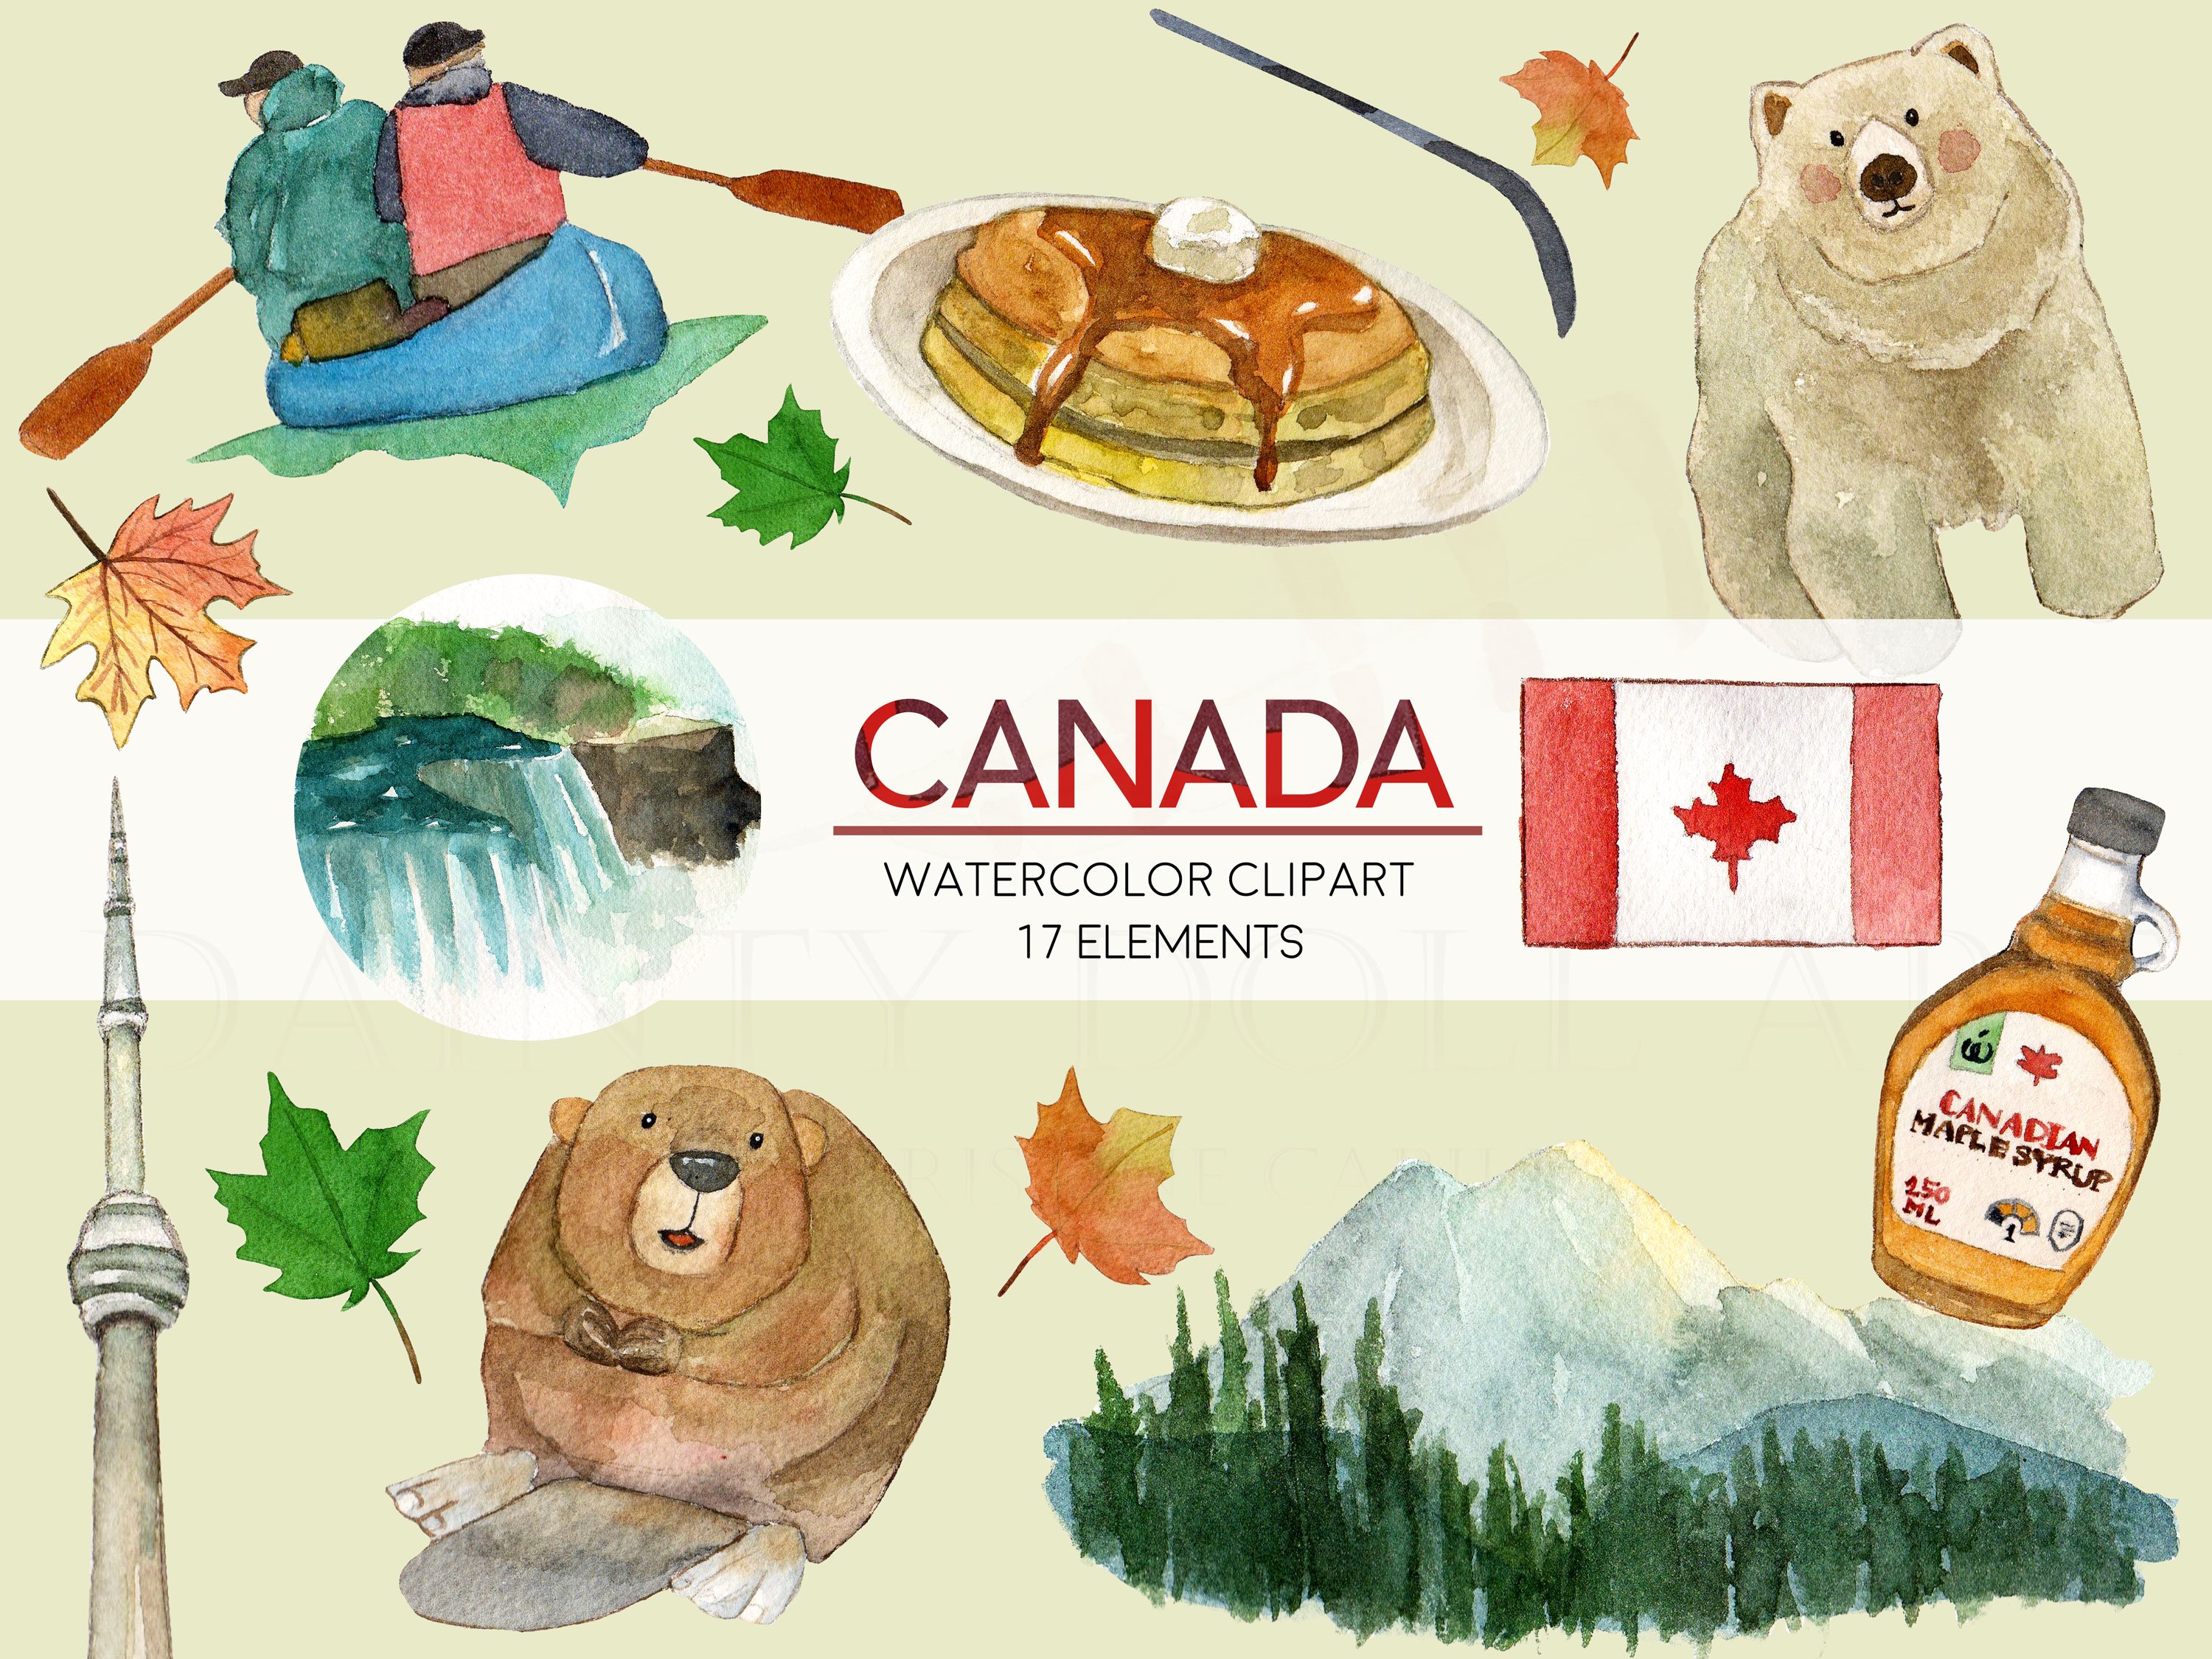 Watercolor Canada Travel Clipart cover image.